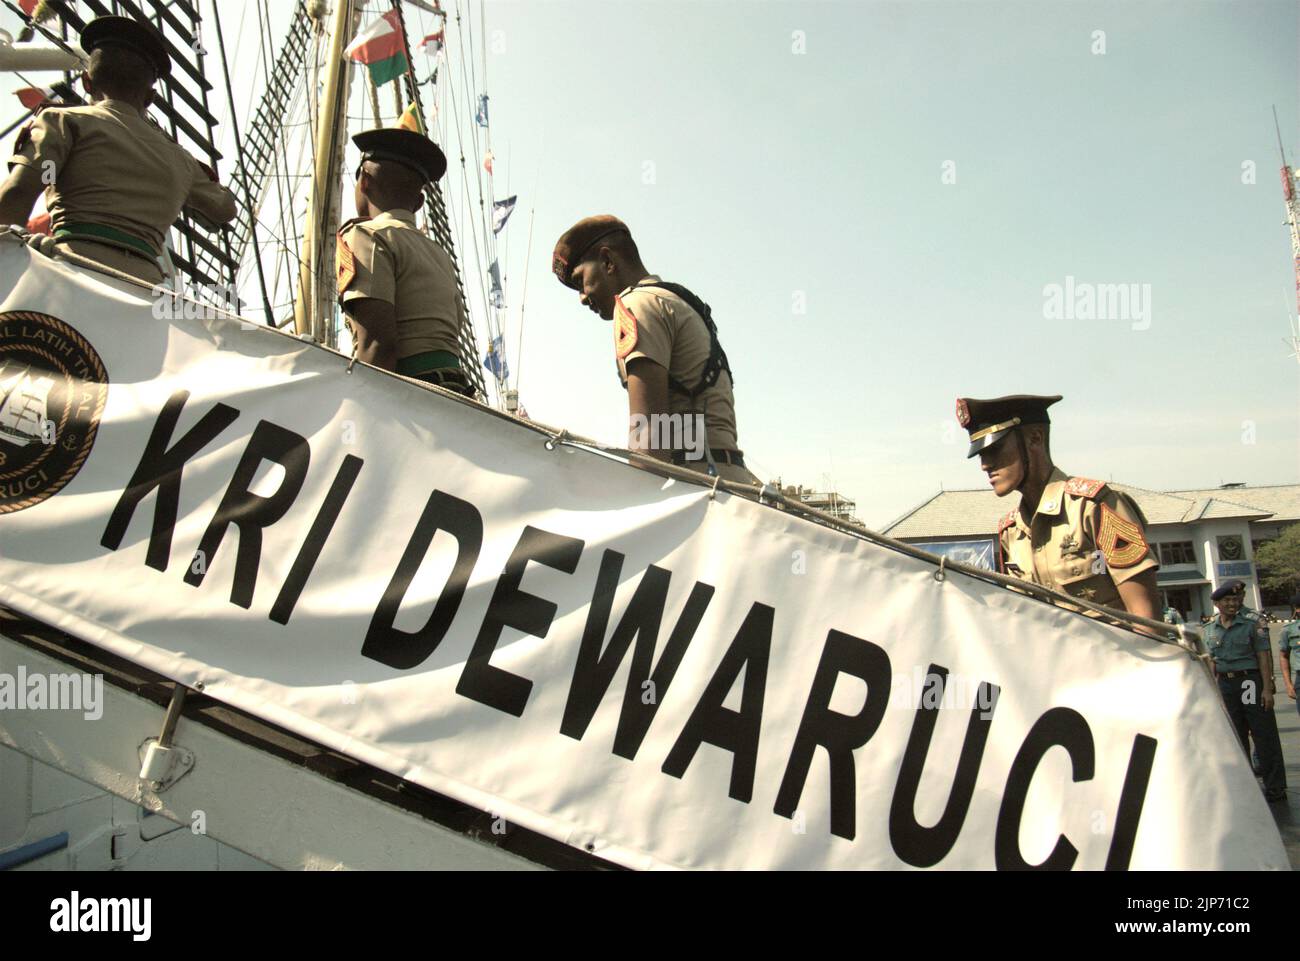 Indonesian navy cadets walking on the ladder to get onto KRI Dewaruci (Dewa Ruci), an Indonesian tall ship, as the barquentine type schooner is opened for public visitors at Kolinlamil harbour (Navy harbour) in Tanjung Priok, North Jakarta, Jakarta, Indonesia. Stock Photo